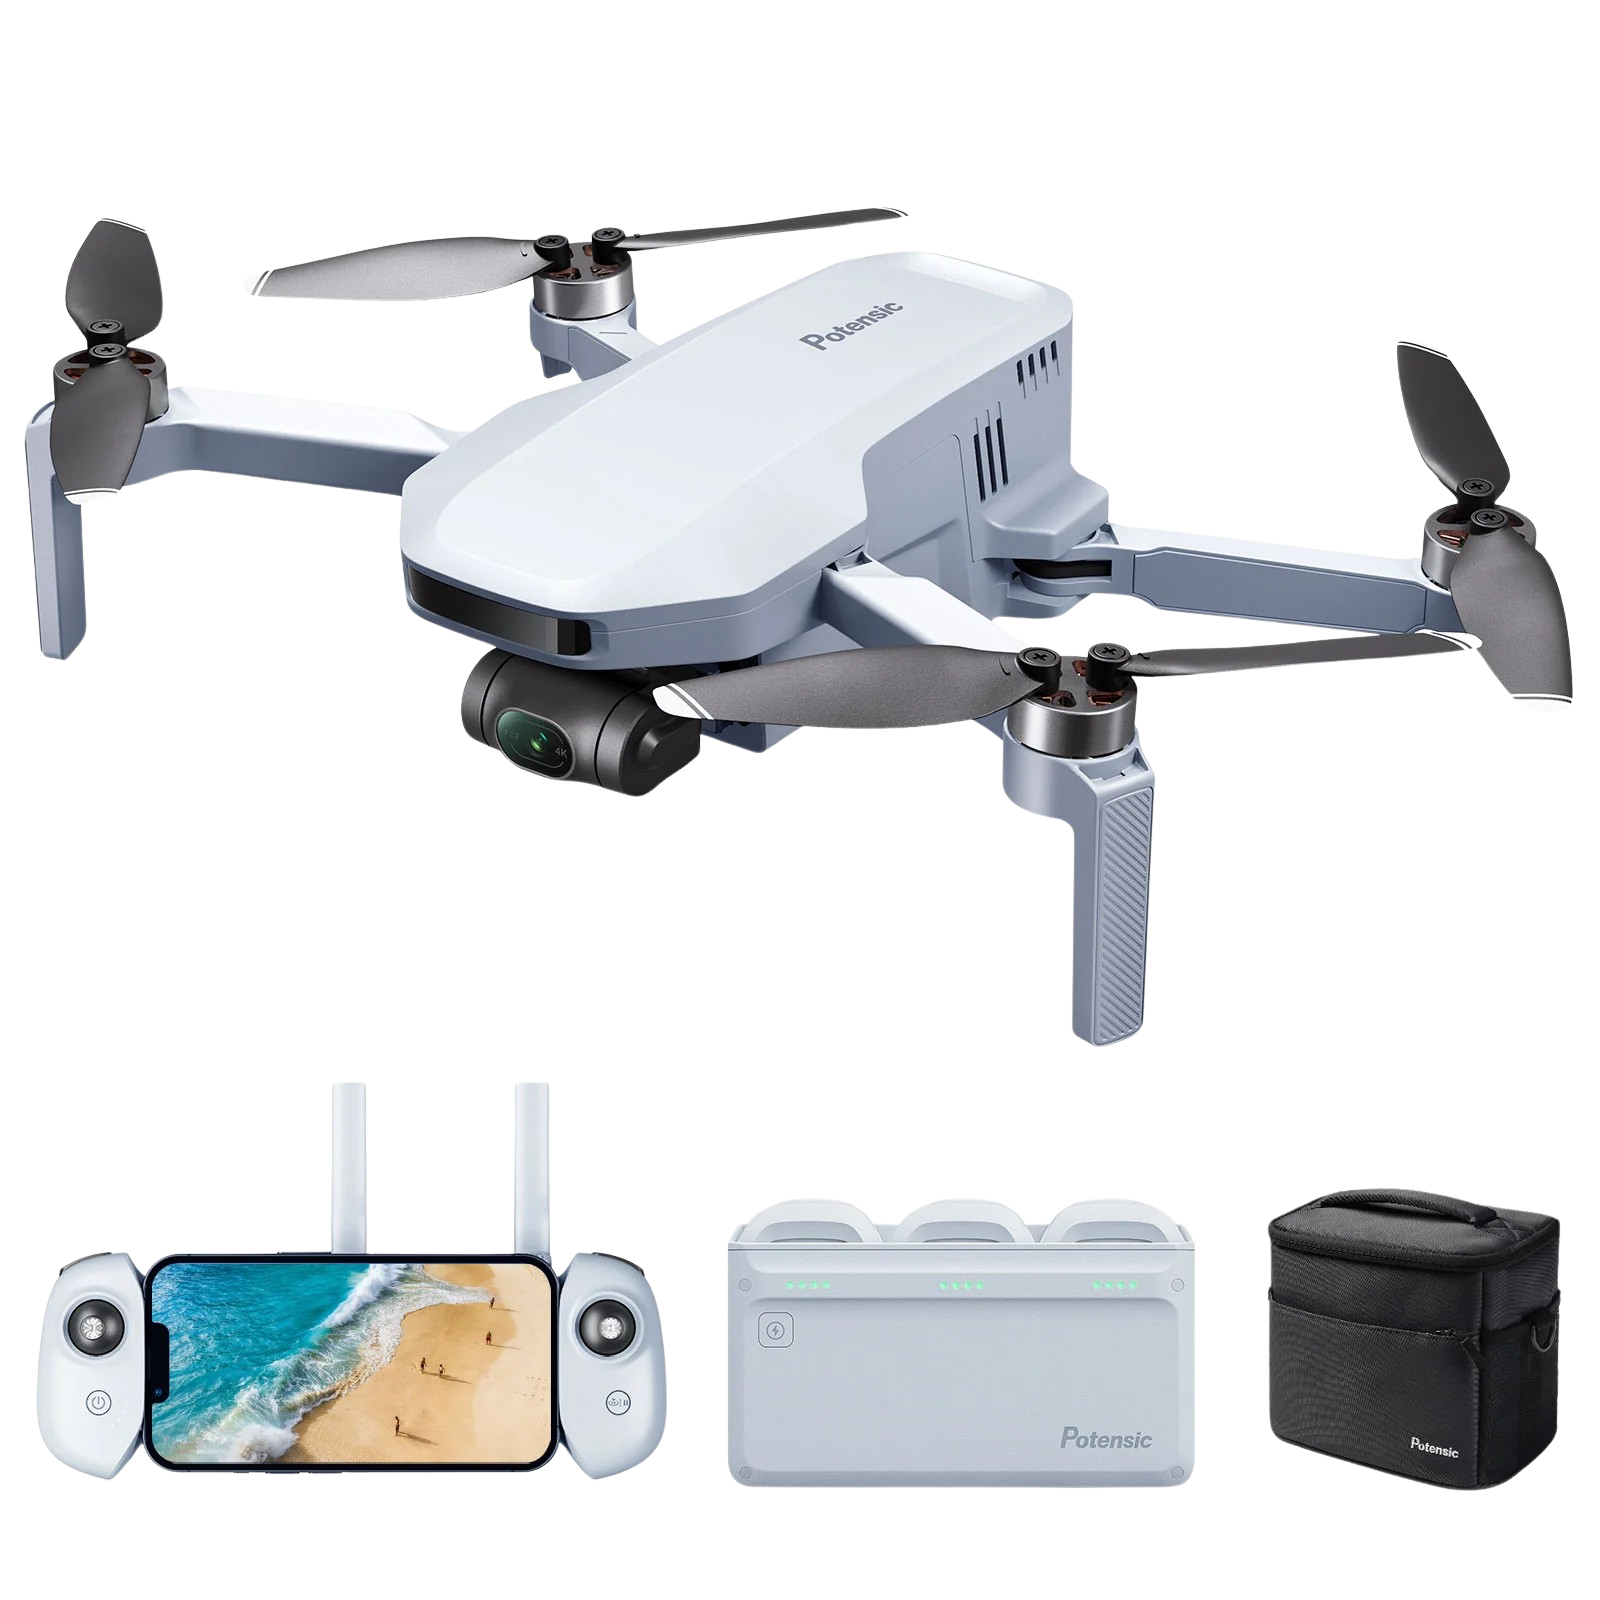 Potensic ATOM Fly More Combo Kit Foldable Quadcopter Drone 3-Axis Gimbal 4K Video 12MP Camera Visual Tracking 35 MPH 3.7 Mile Range New